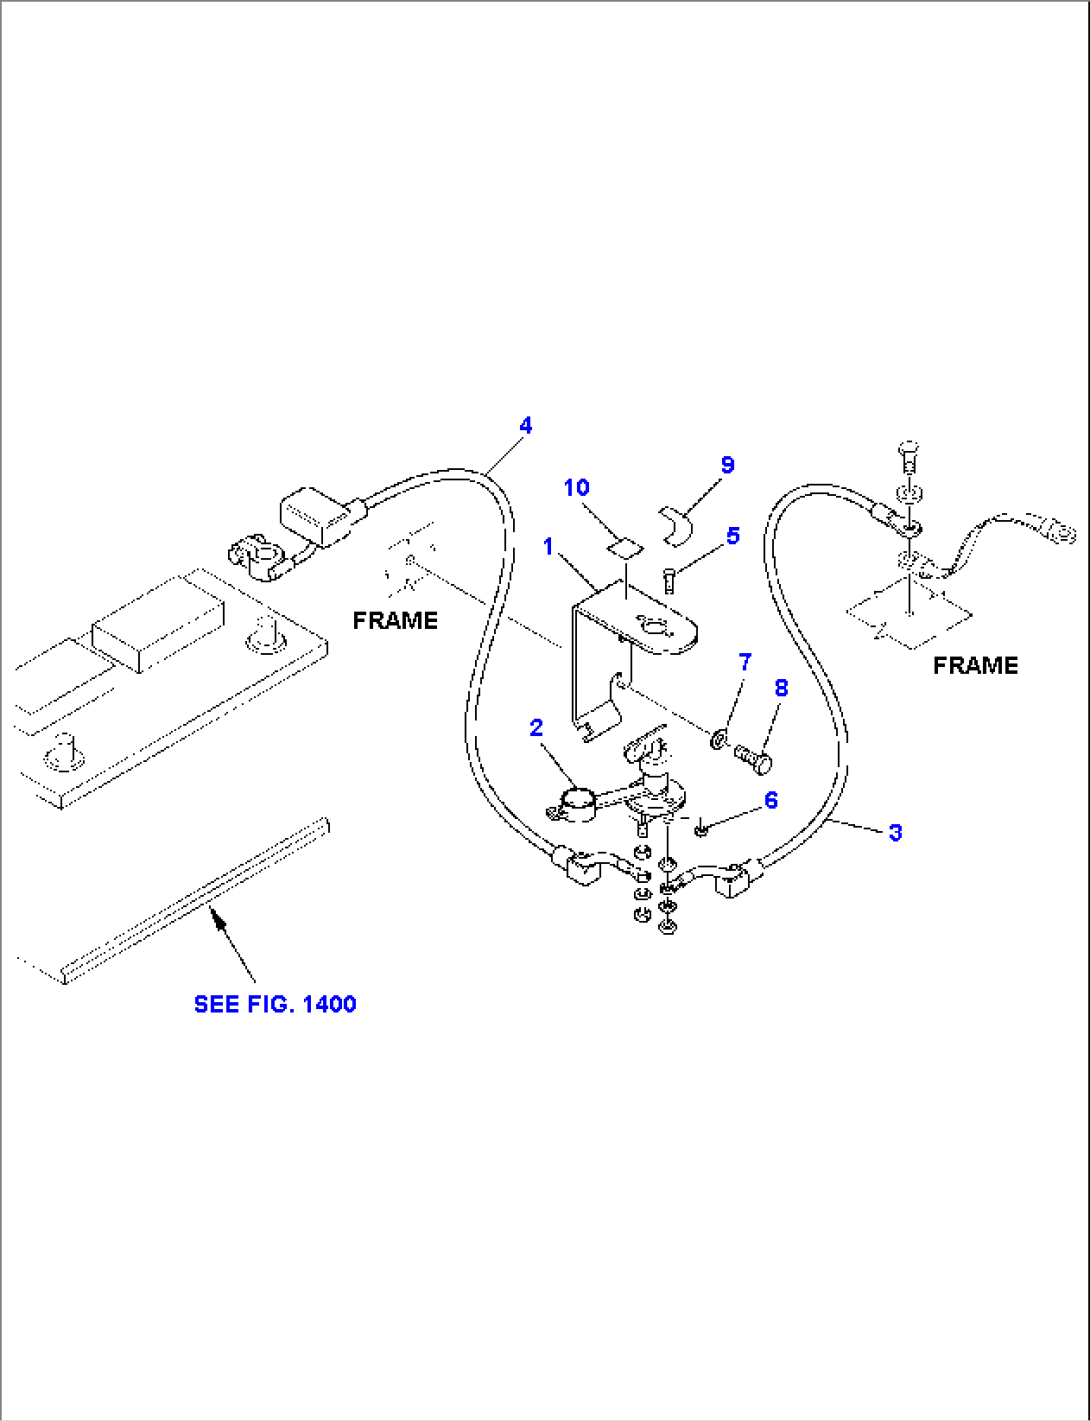 ELECTRICAL SYSTEM (BATTERY DISCONNECTING SWITCH)